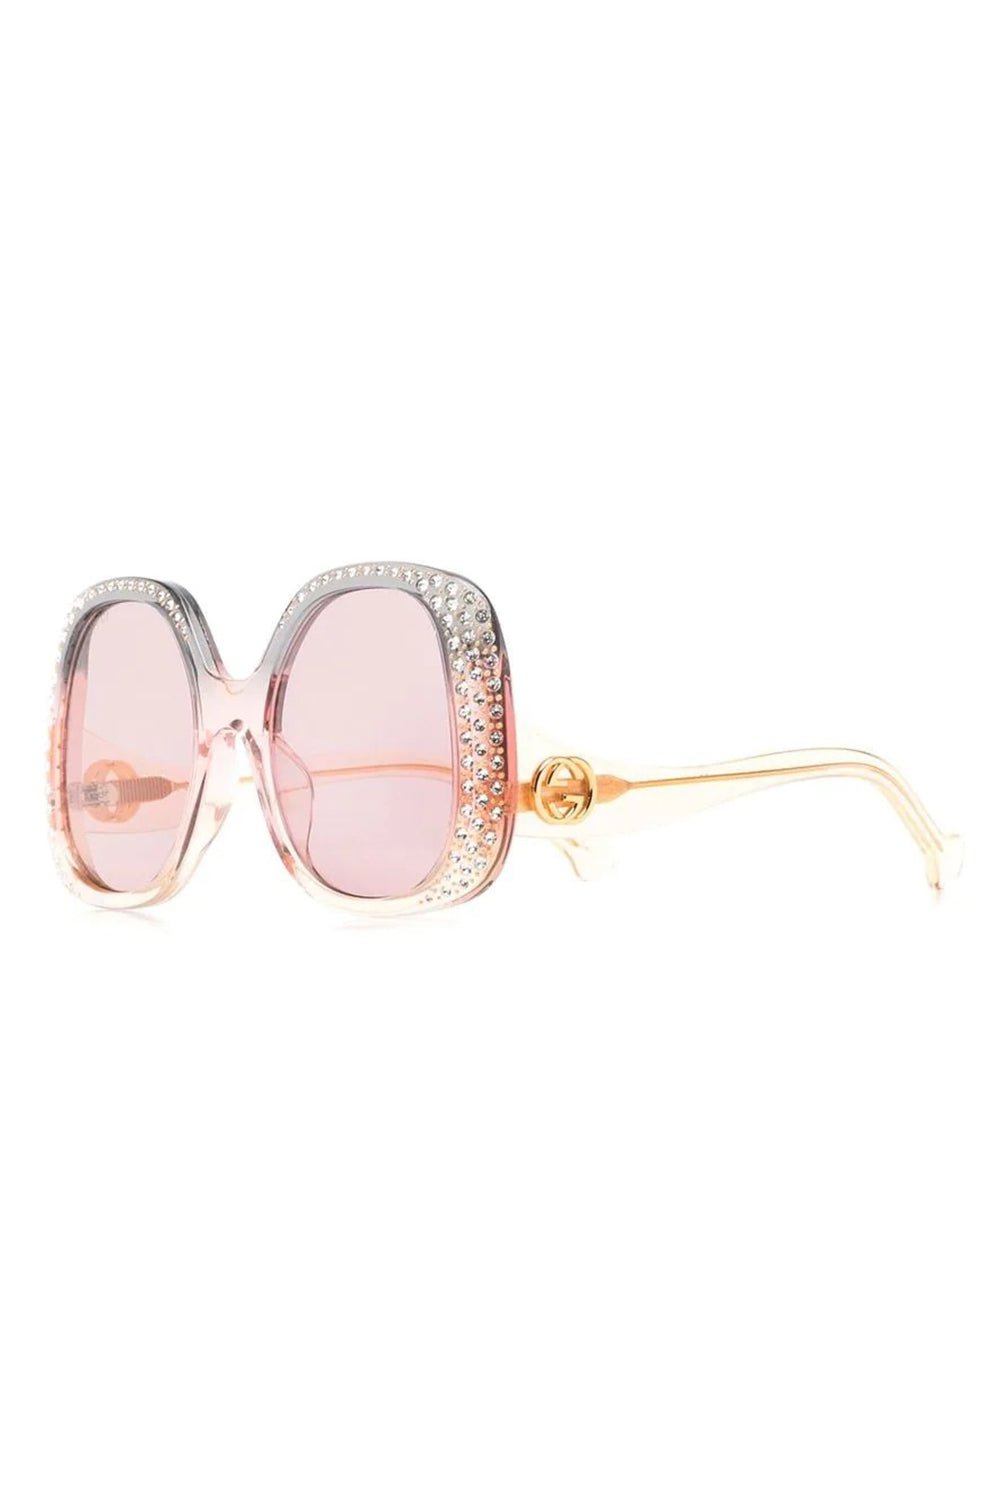 GUCCI-Oval Frame Sunglasses-GREY/YELLOW/PINK